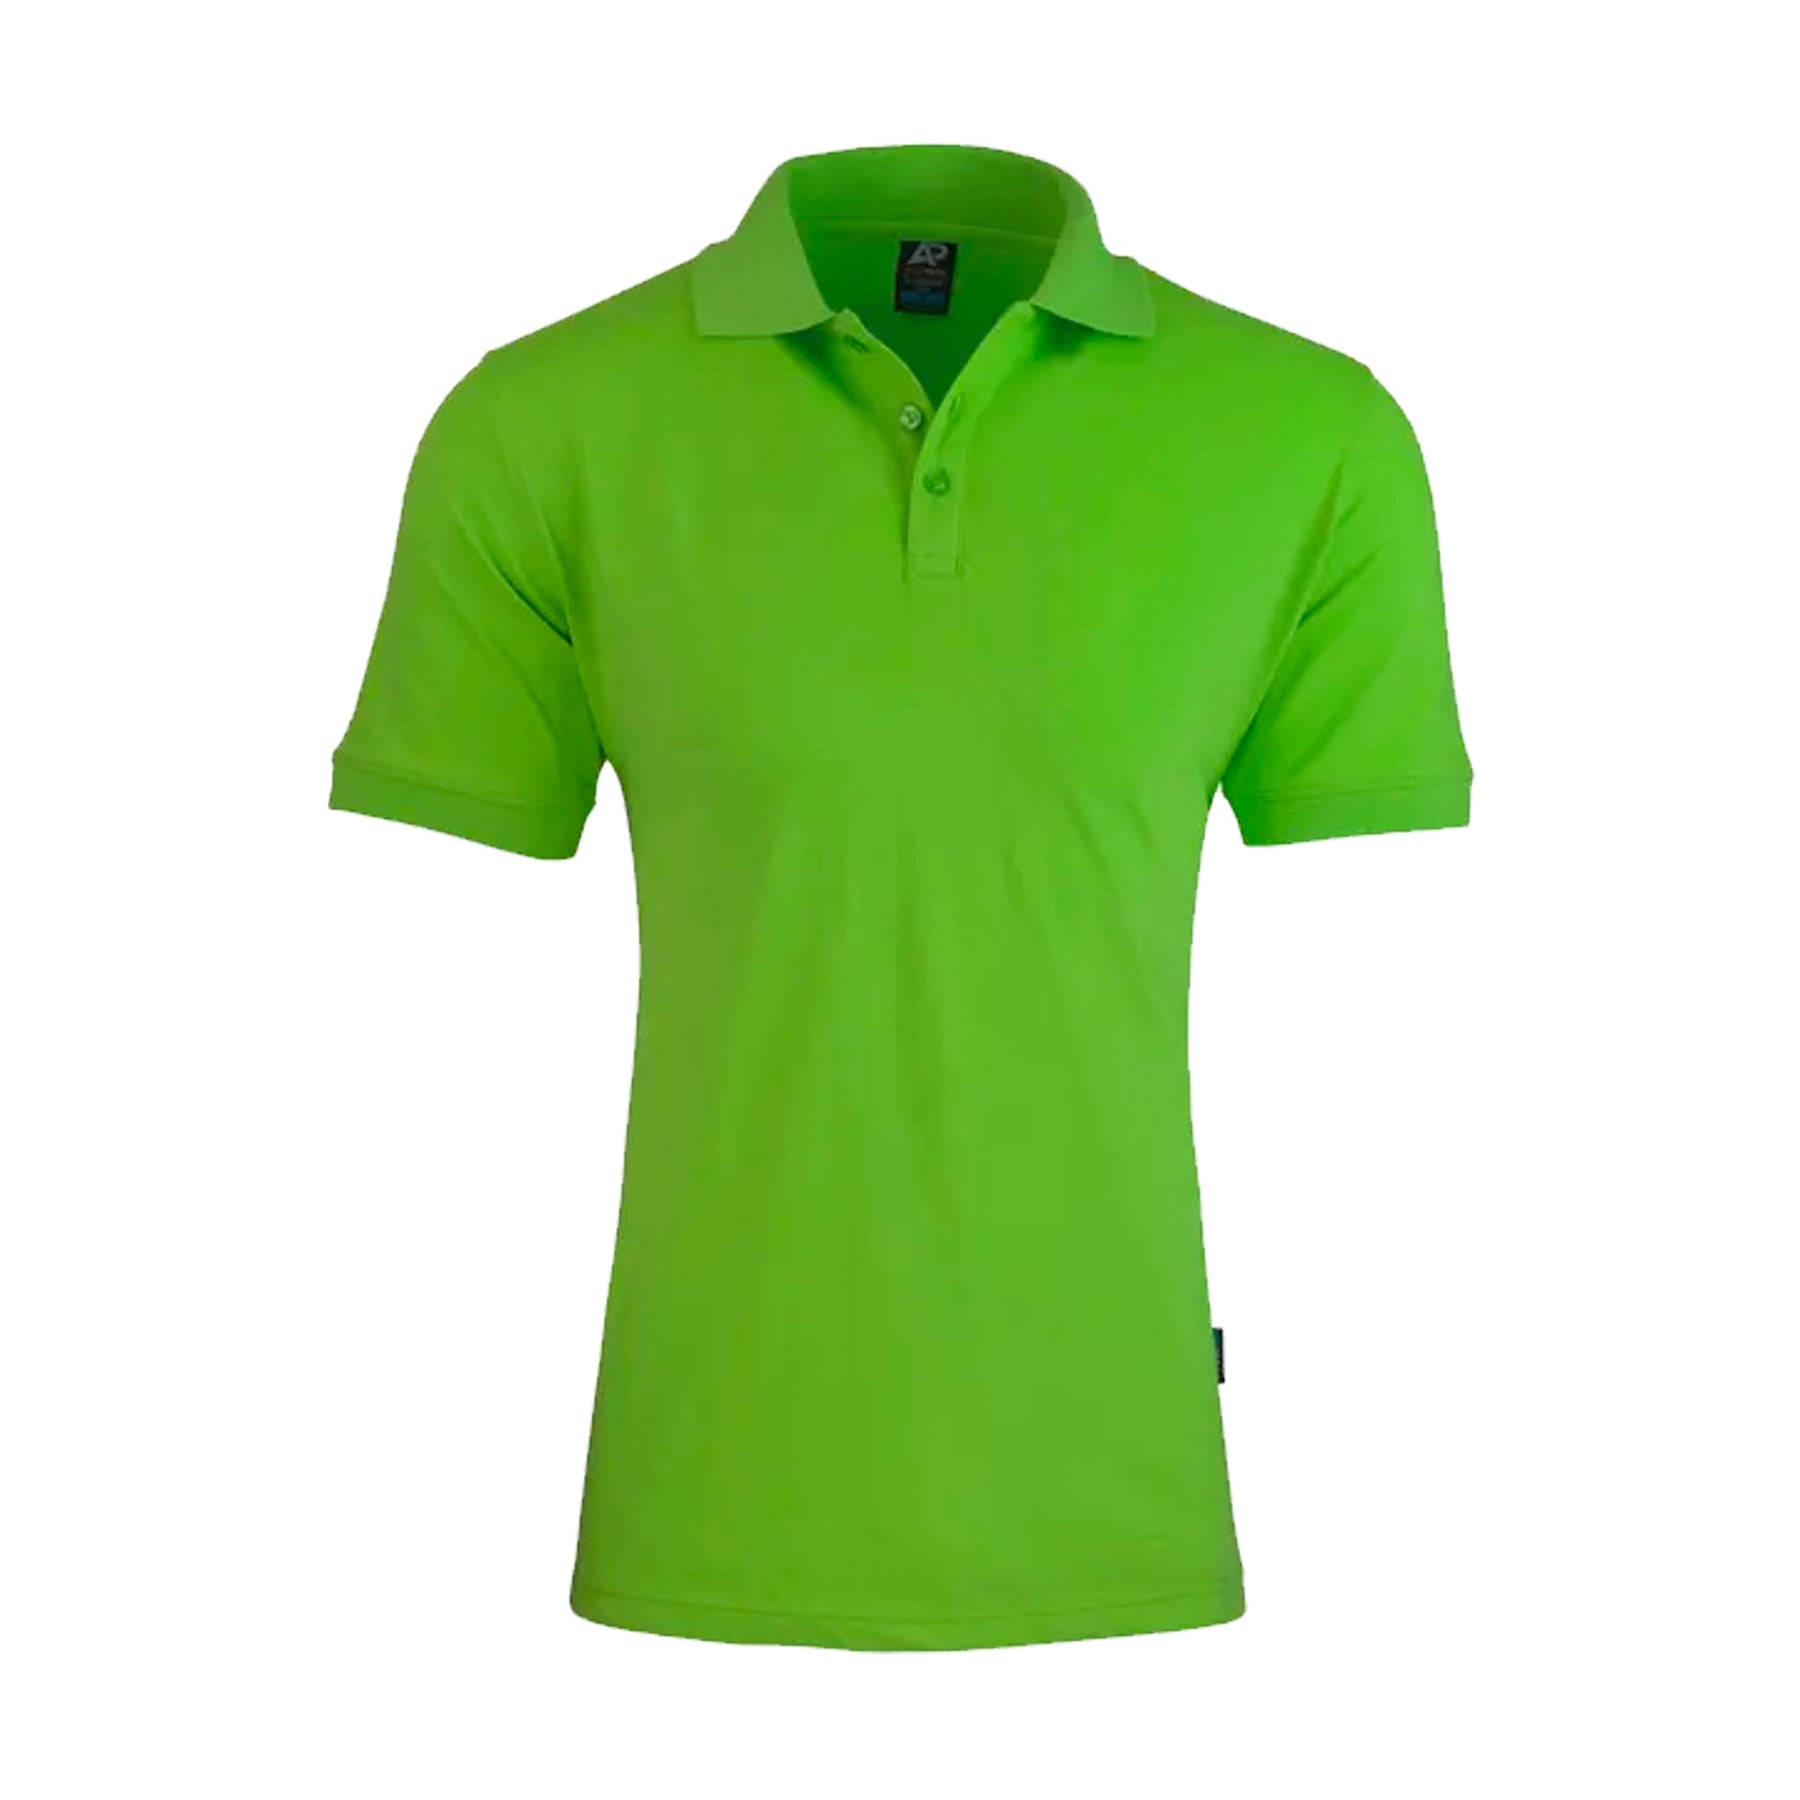 aussie pacific claremont mens polo in apple